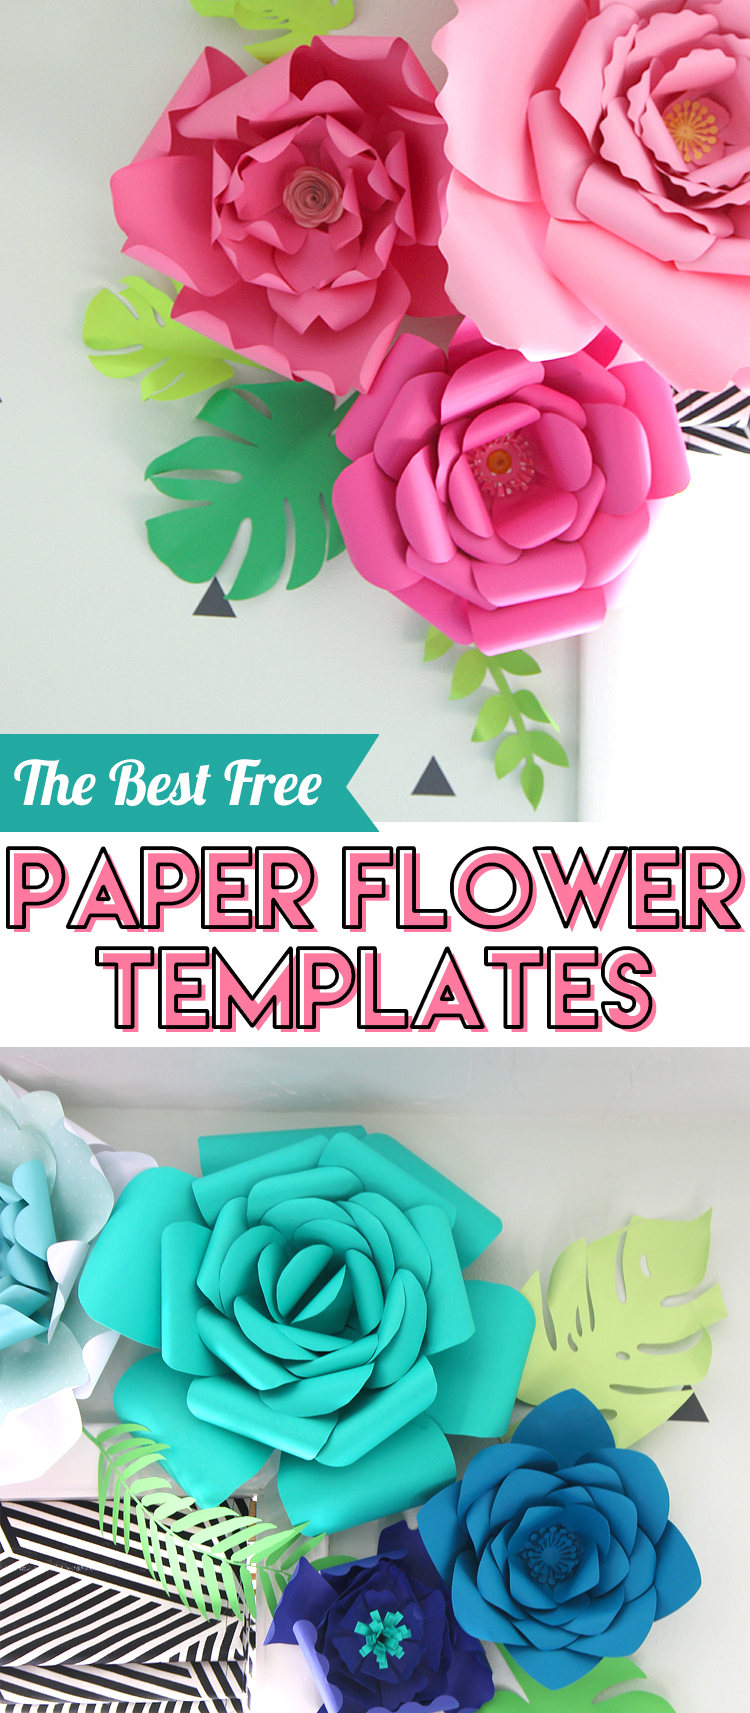 Download Best Free Paper Flower Templates The Craft Patch